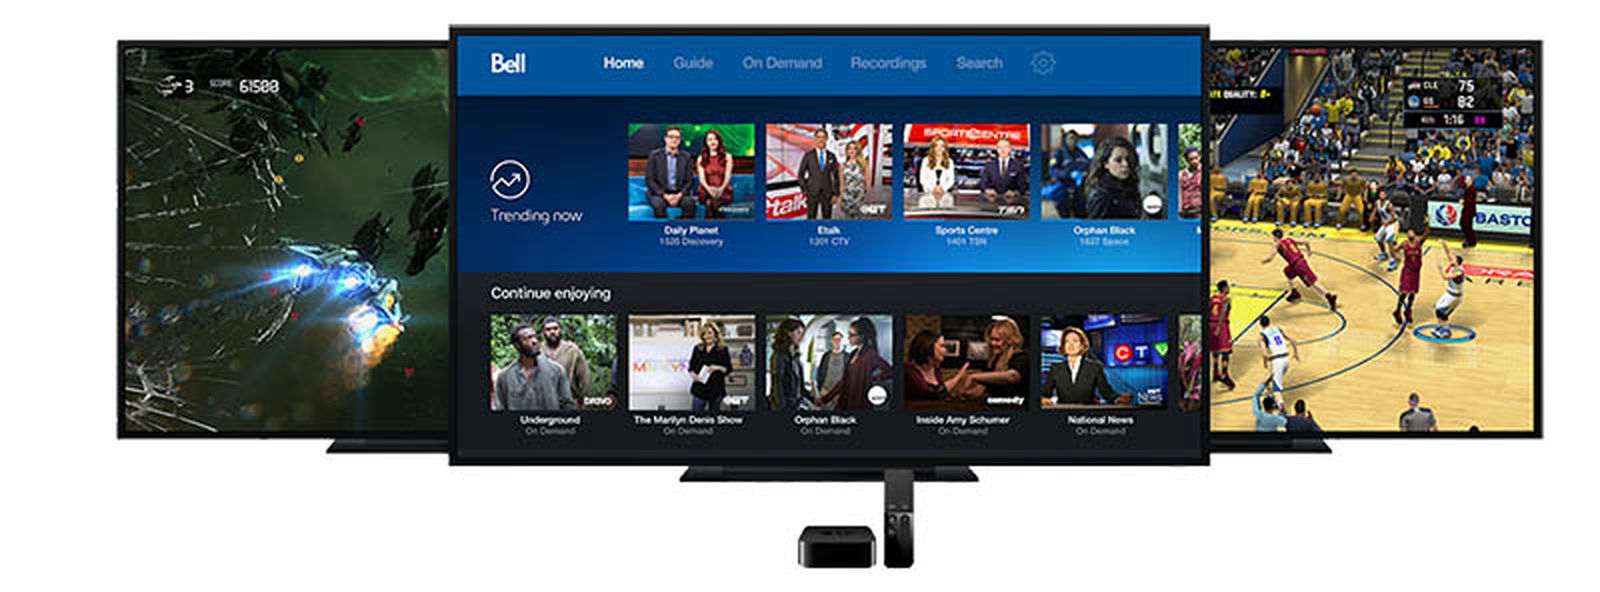 Bell Fibe TV Now Available on Apple TV in Canada - MacRumors